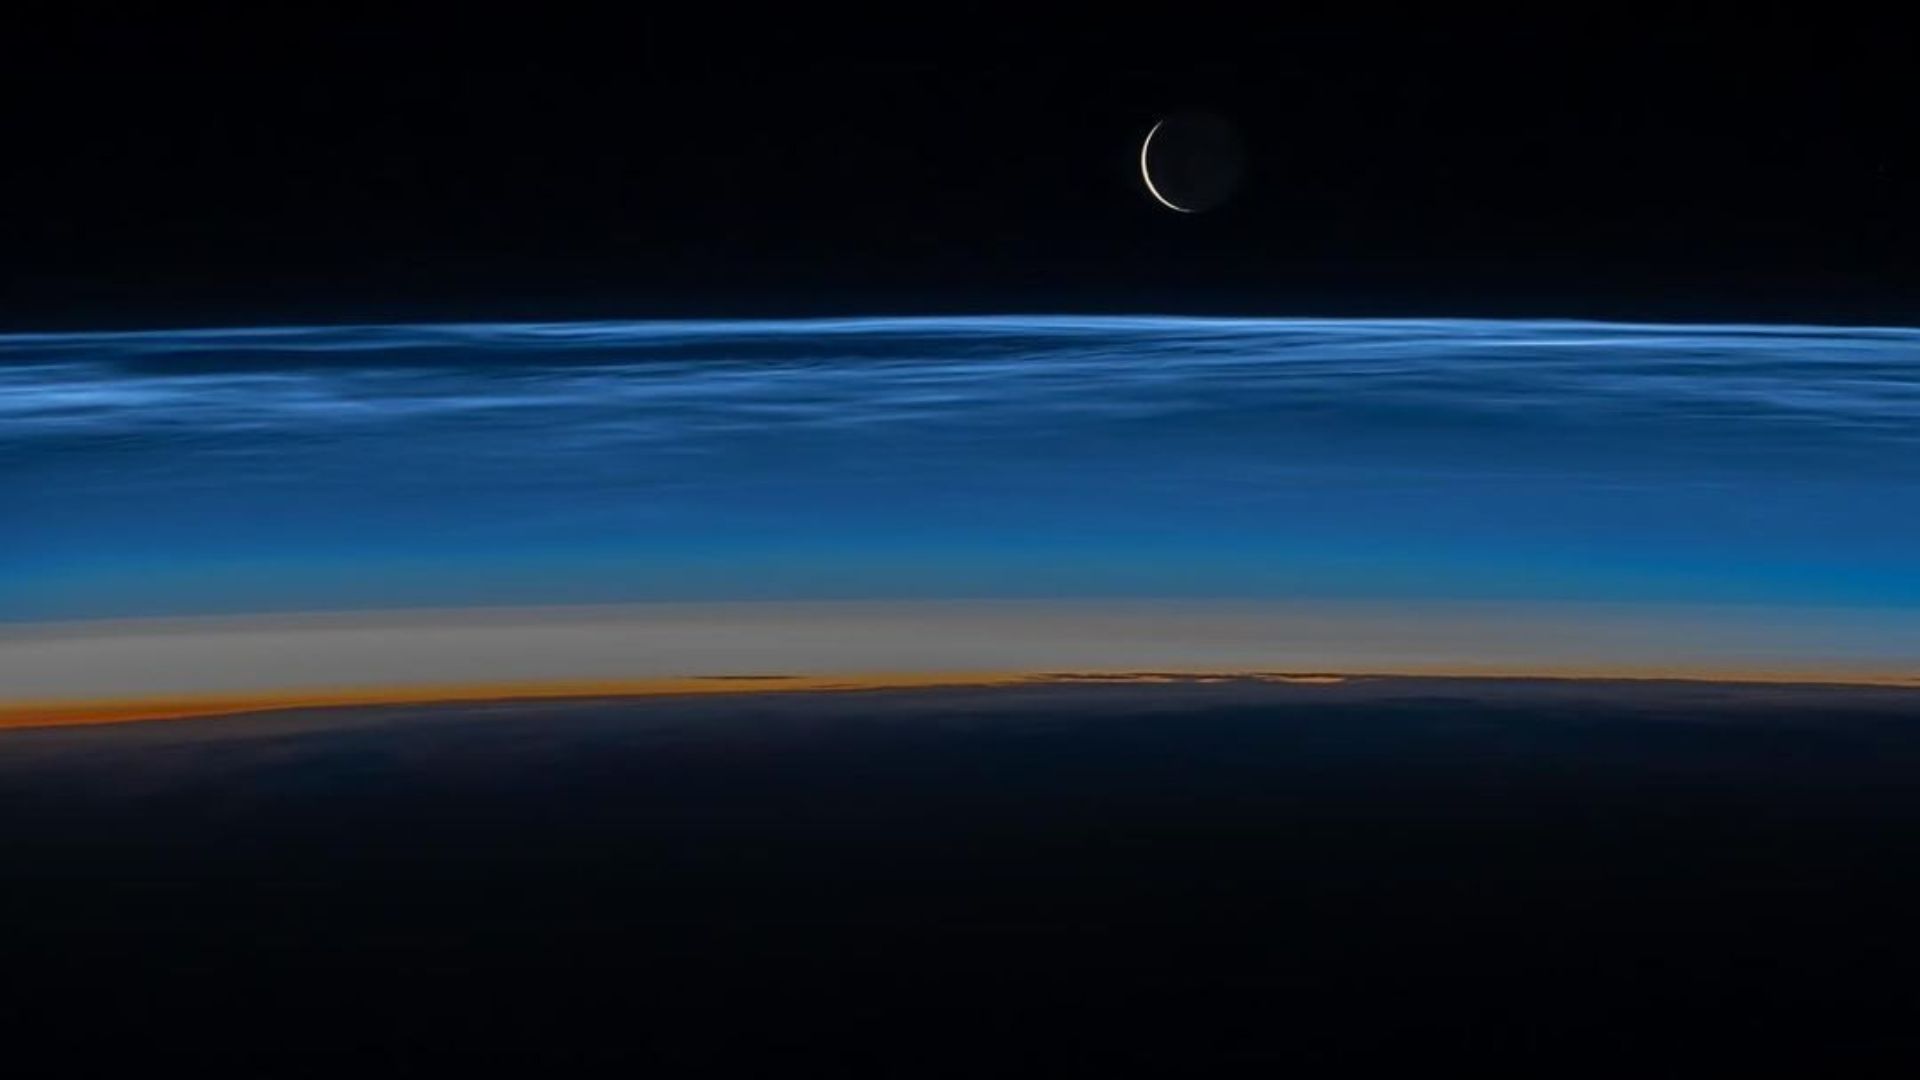 Dancing In The Moonlight: NASA Astronaut’s Stunning Moonrise Capture, See Pic